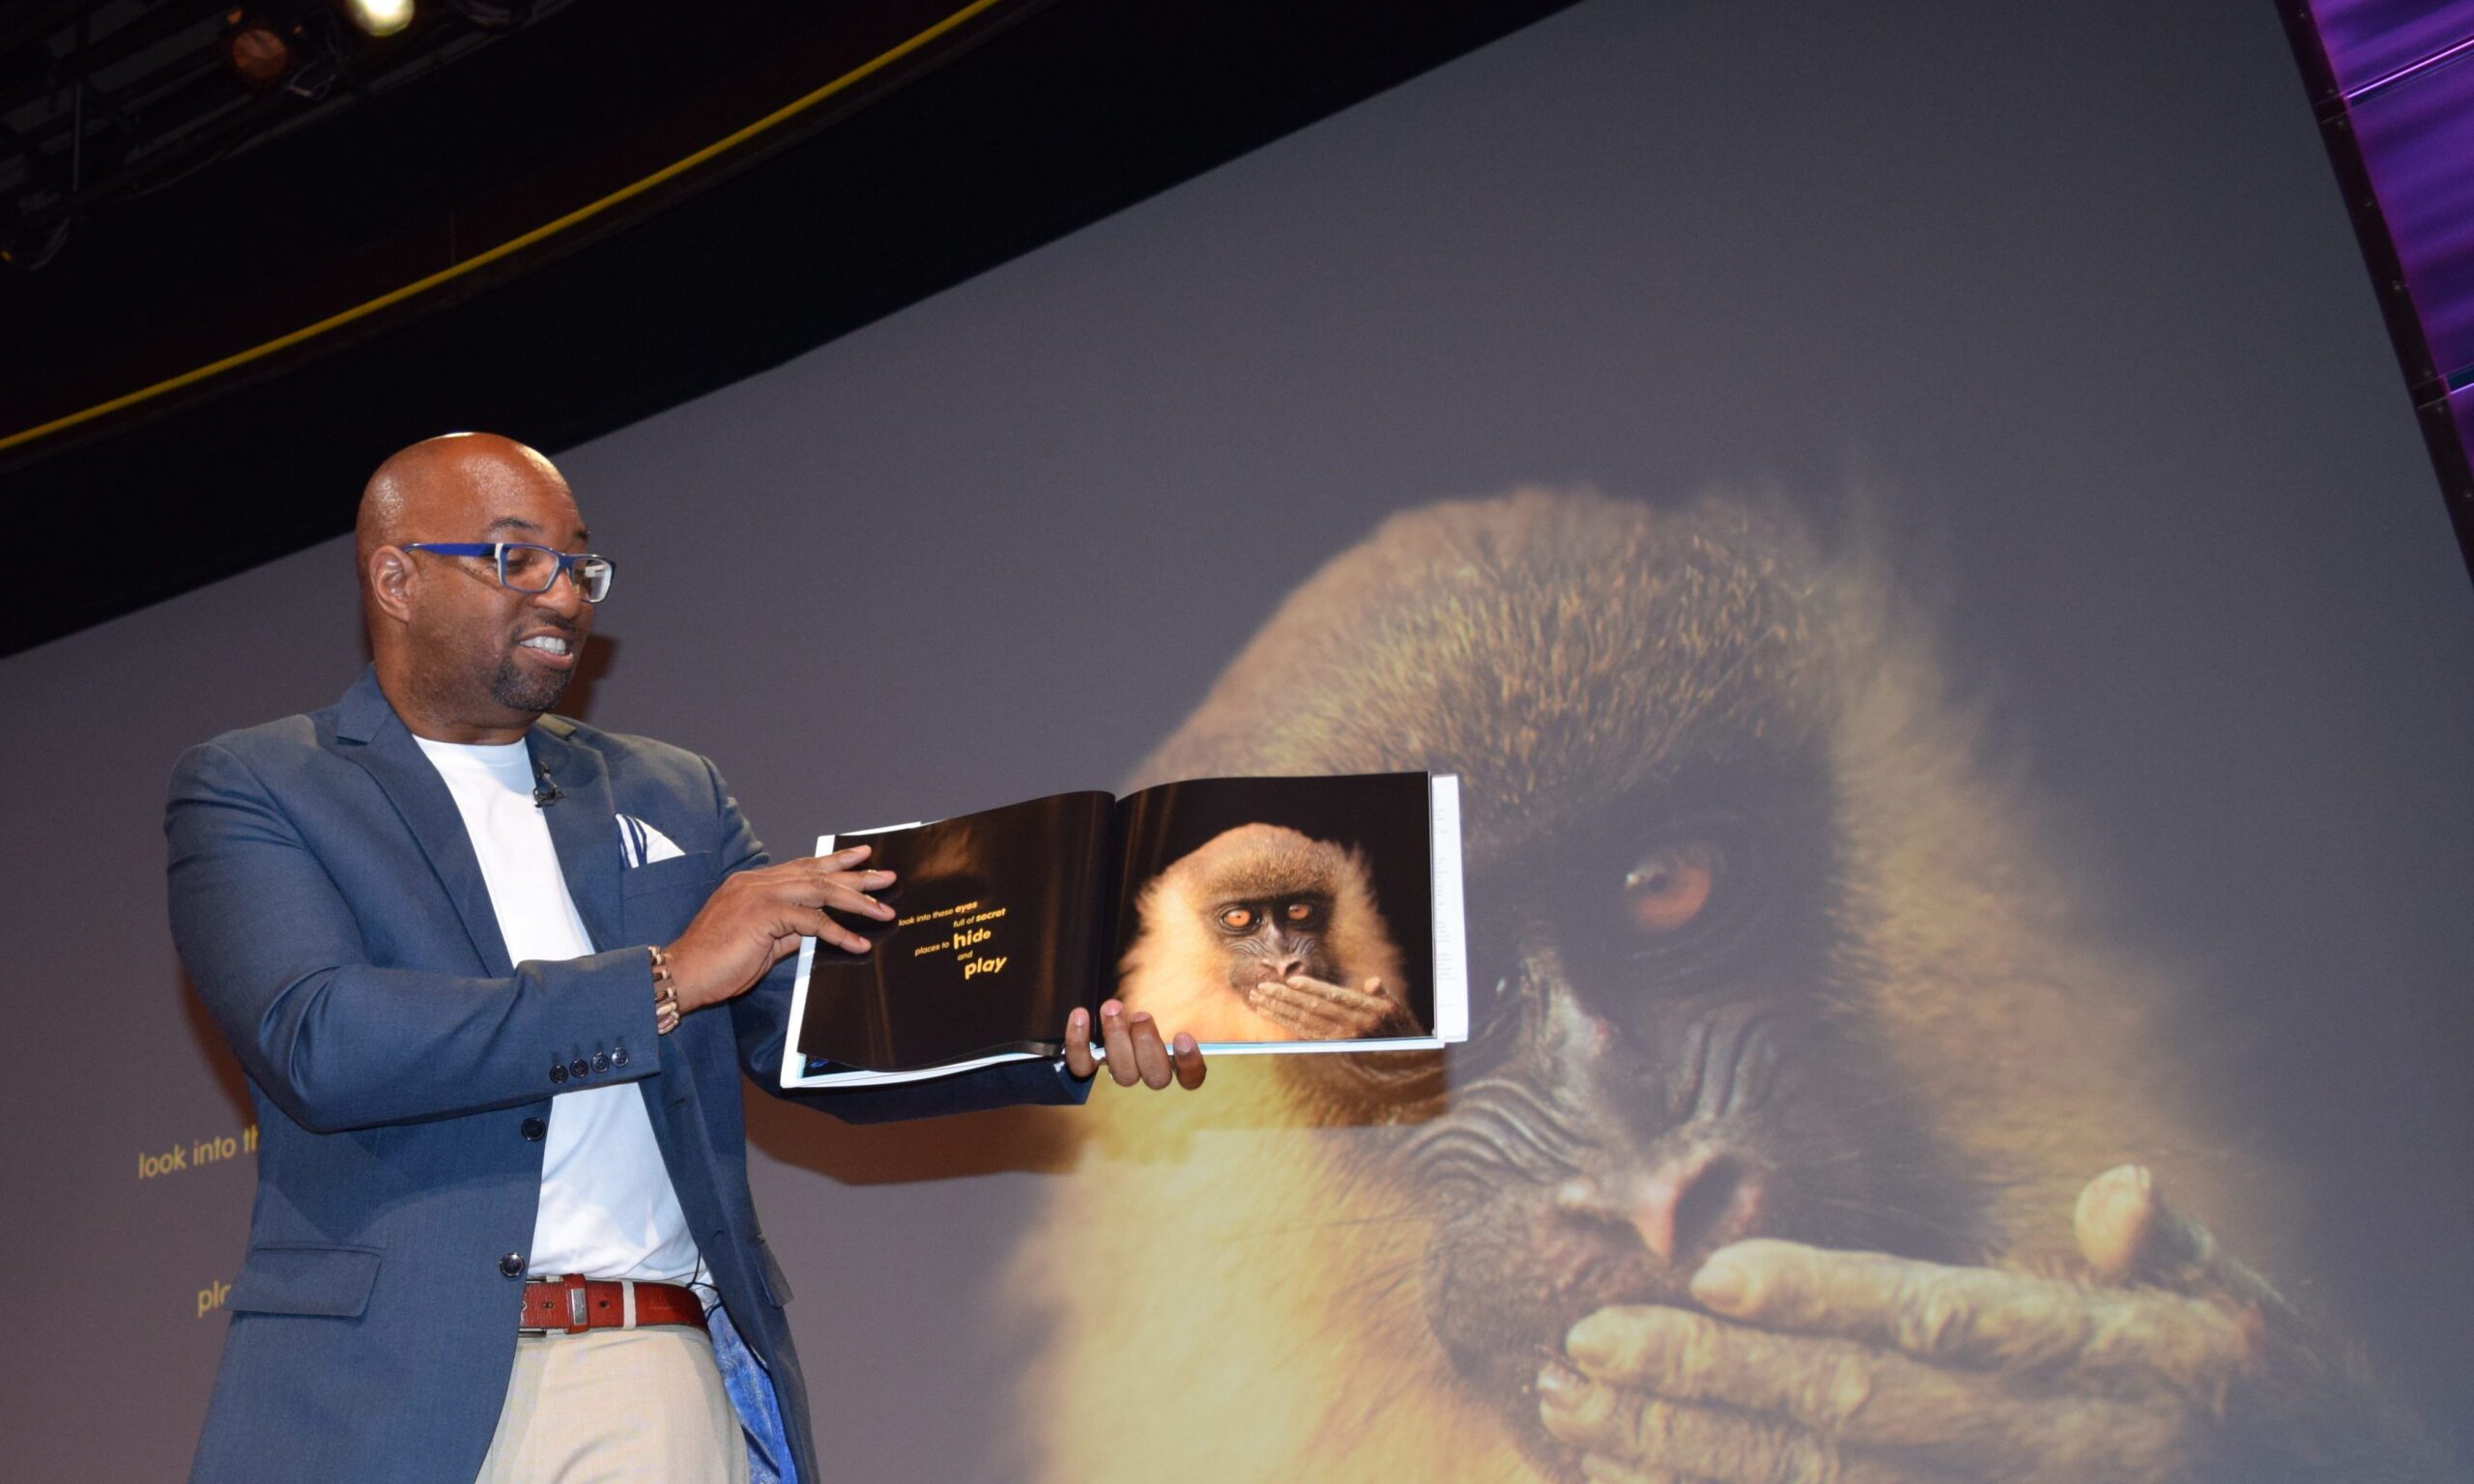 Award-winning author Kwame Alexander reads from "Animal Ark" at National Geographic.